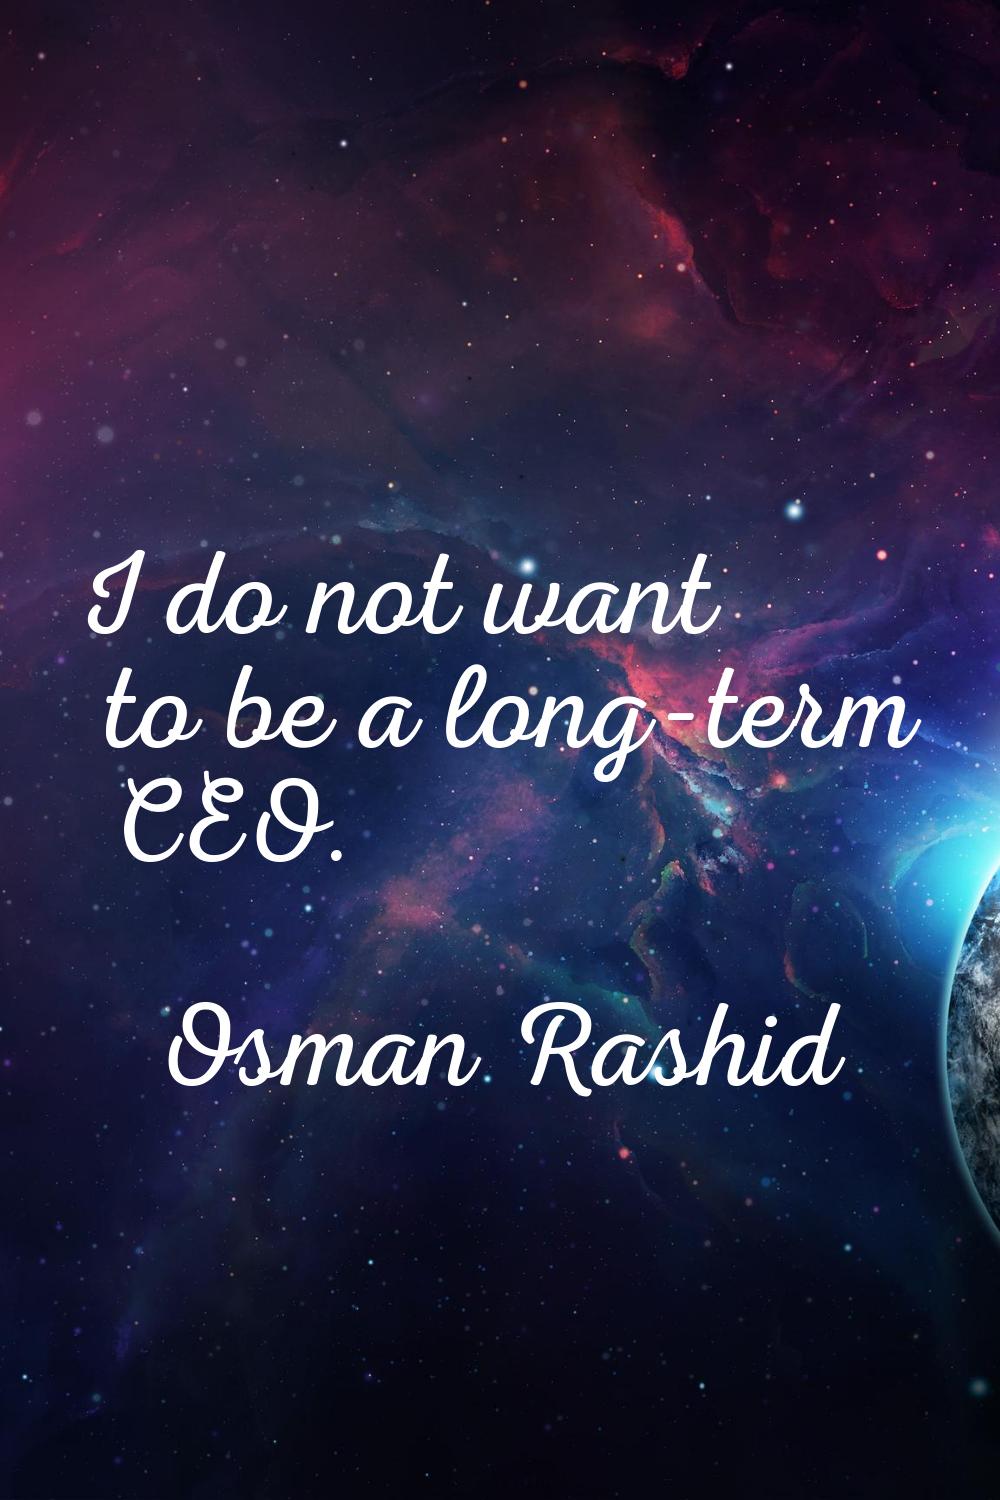 I do not want to be a long-term CEO.